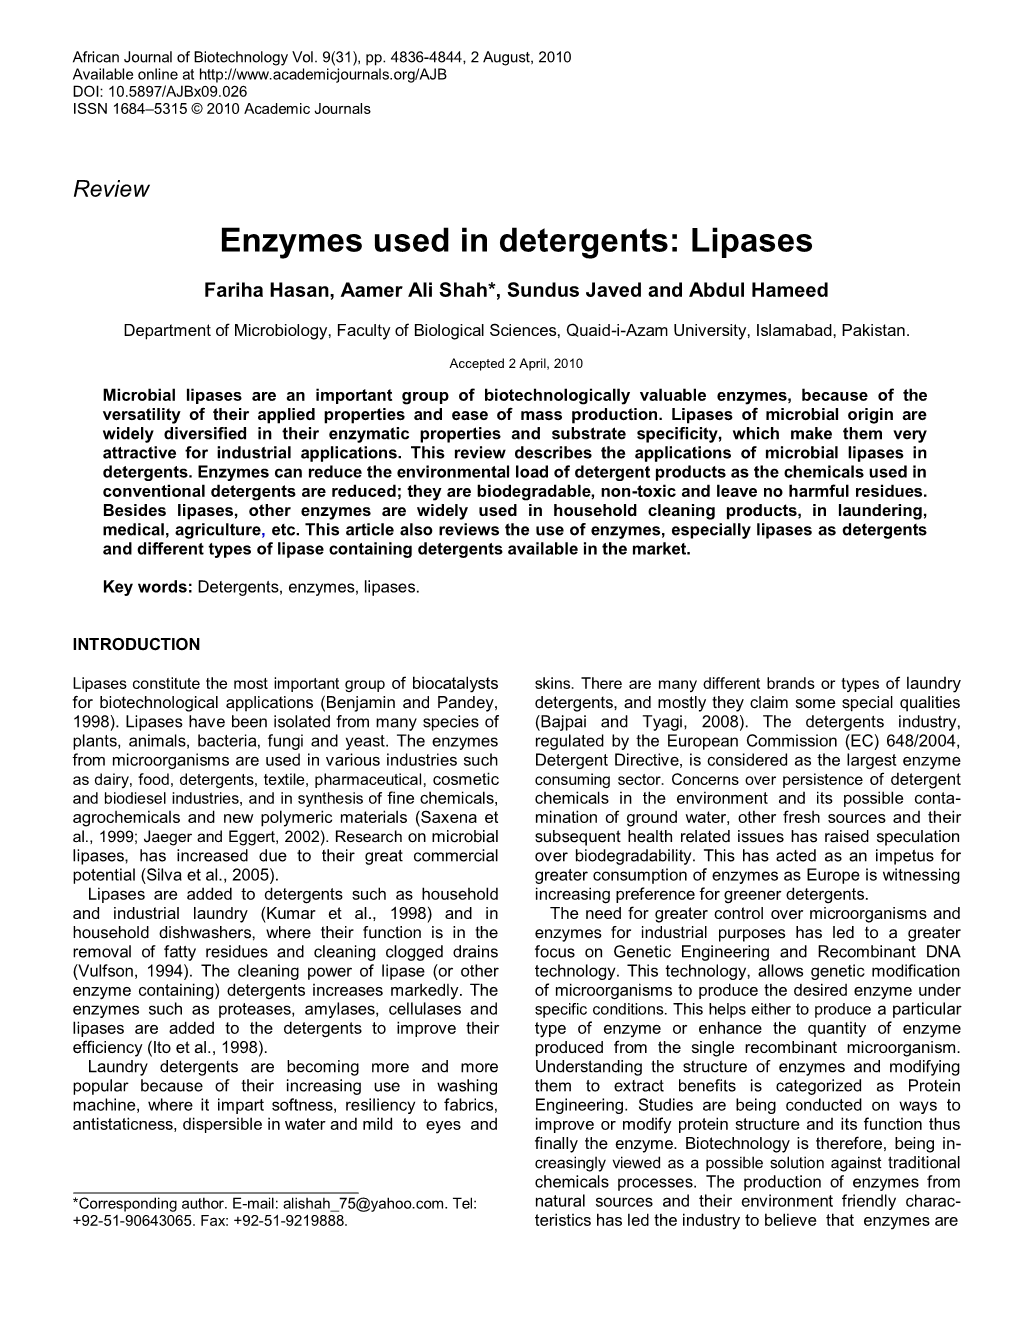 Enzymes Used in Detergents: Lipases